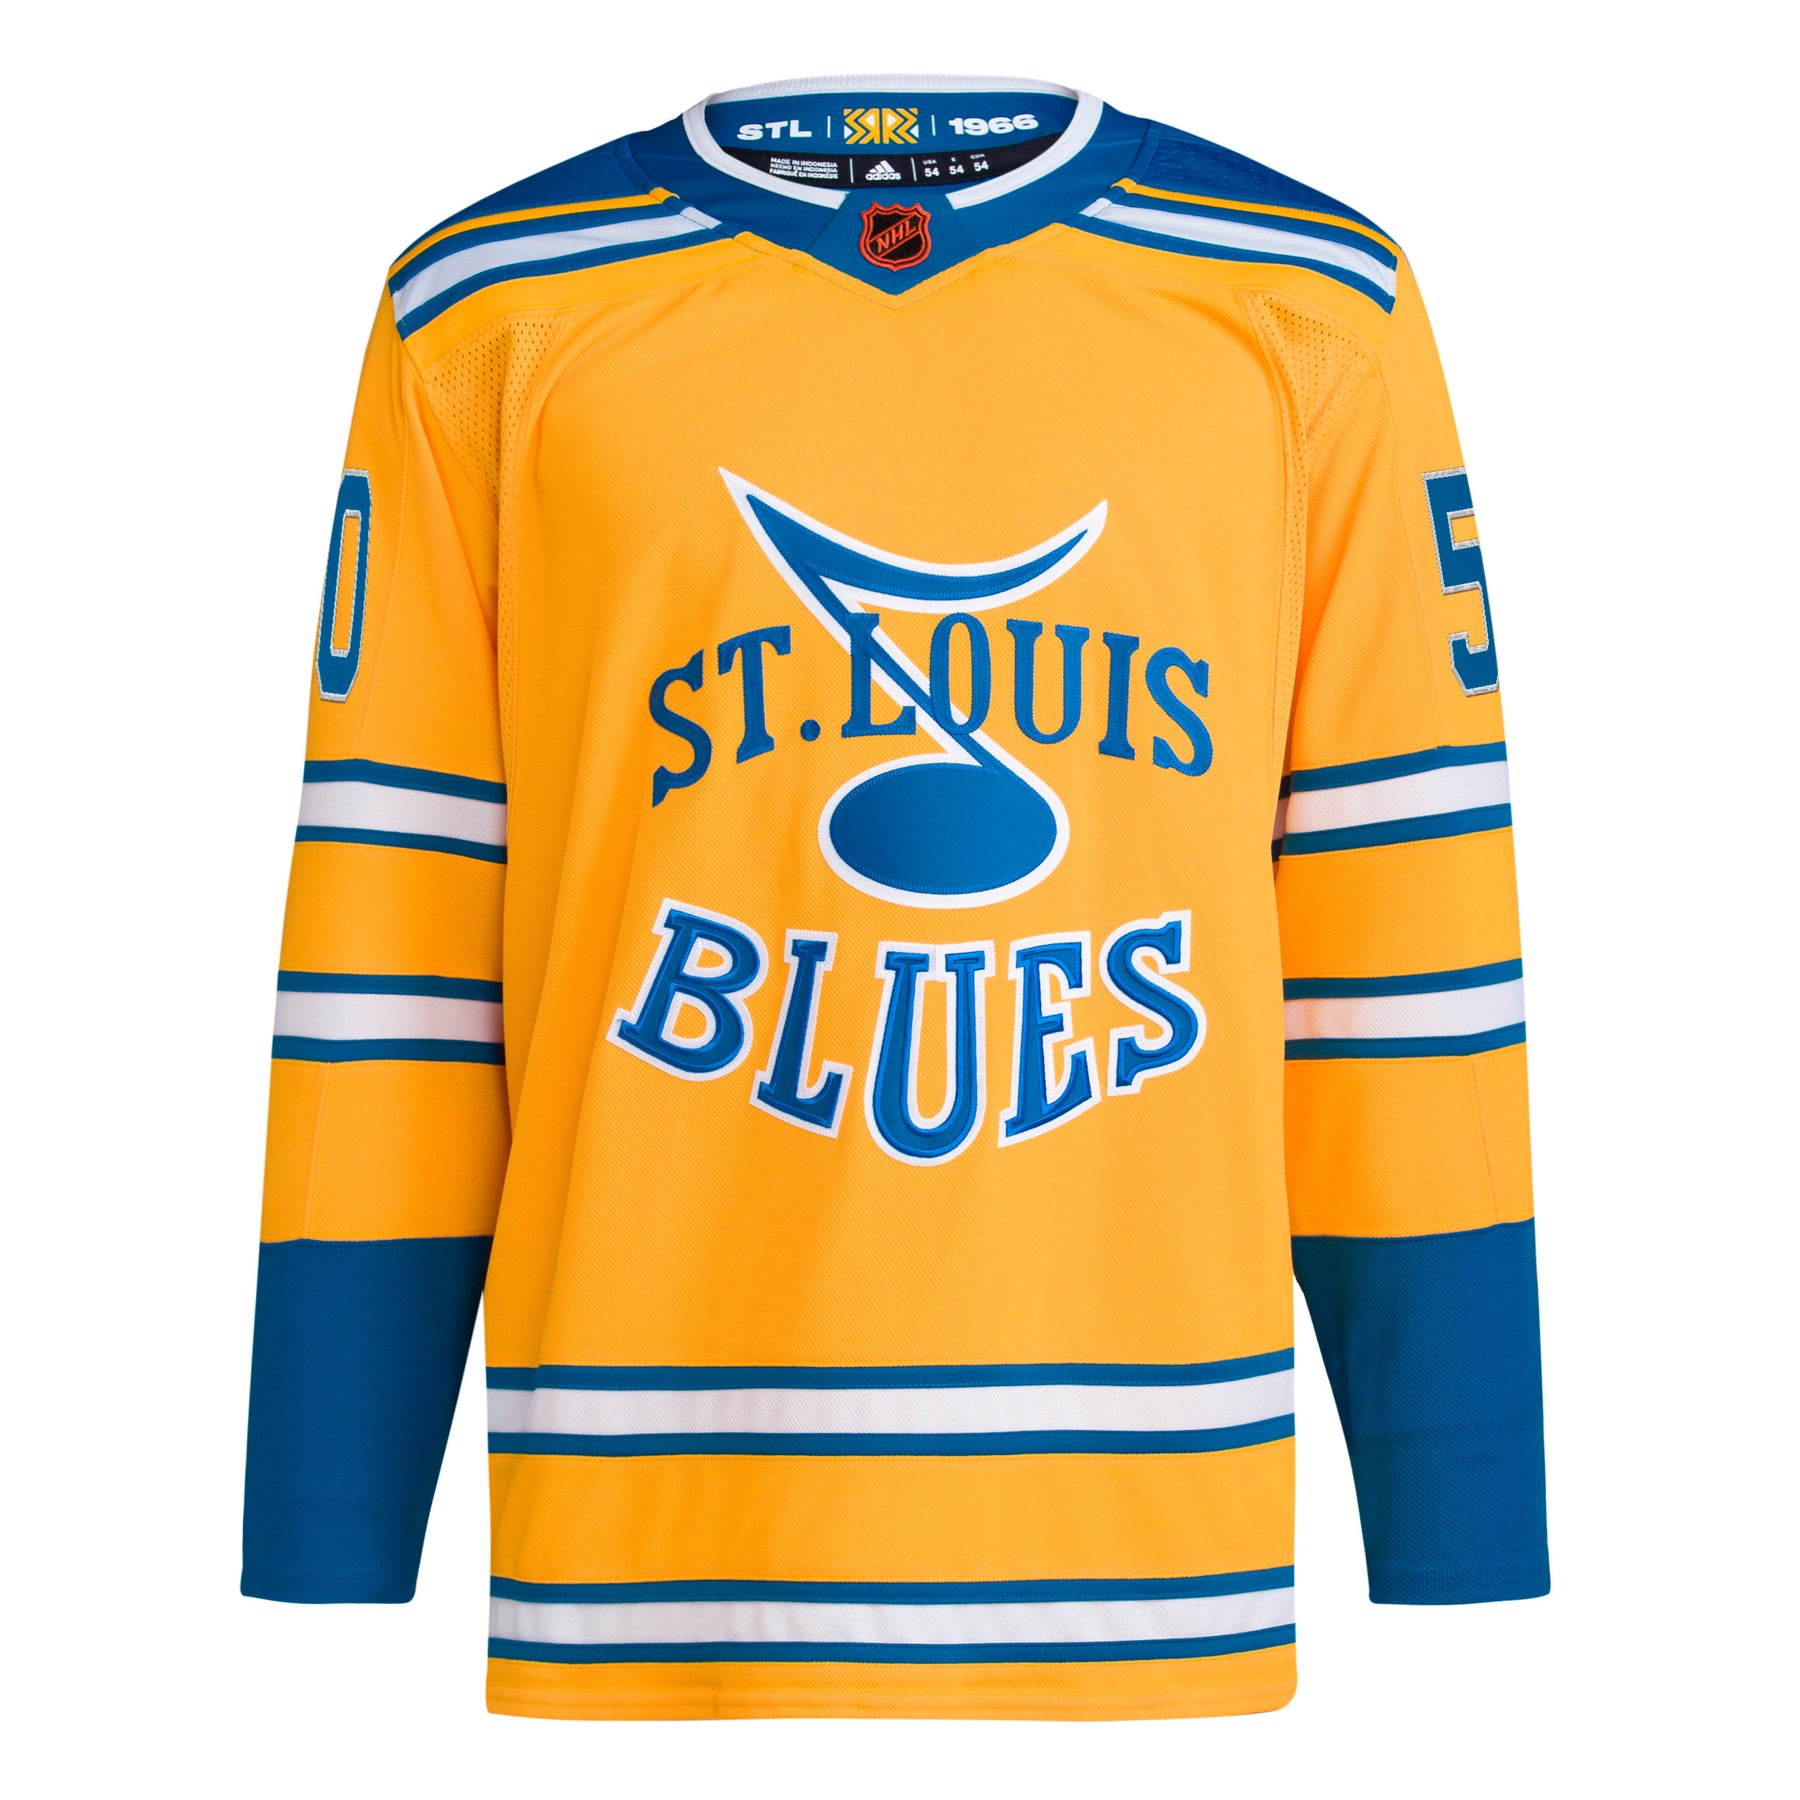 St. Louis Blues Adidas 2020/21 Reverse Retro Authentic Jersey - Red Nhl -  Bluefink